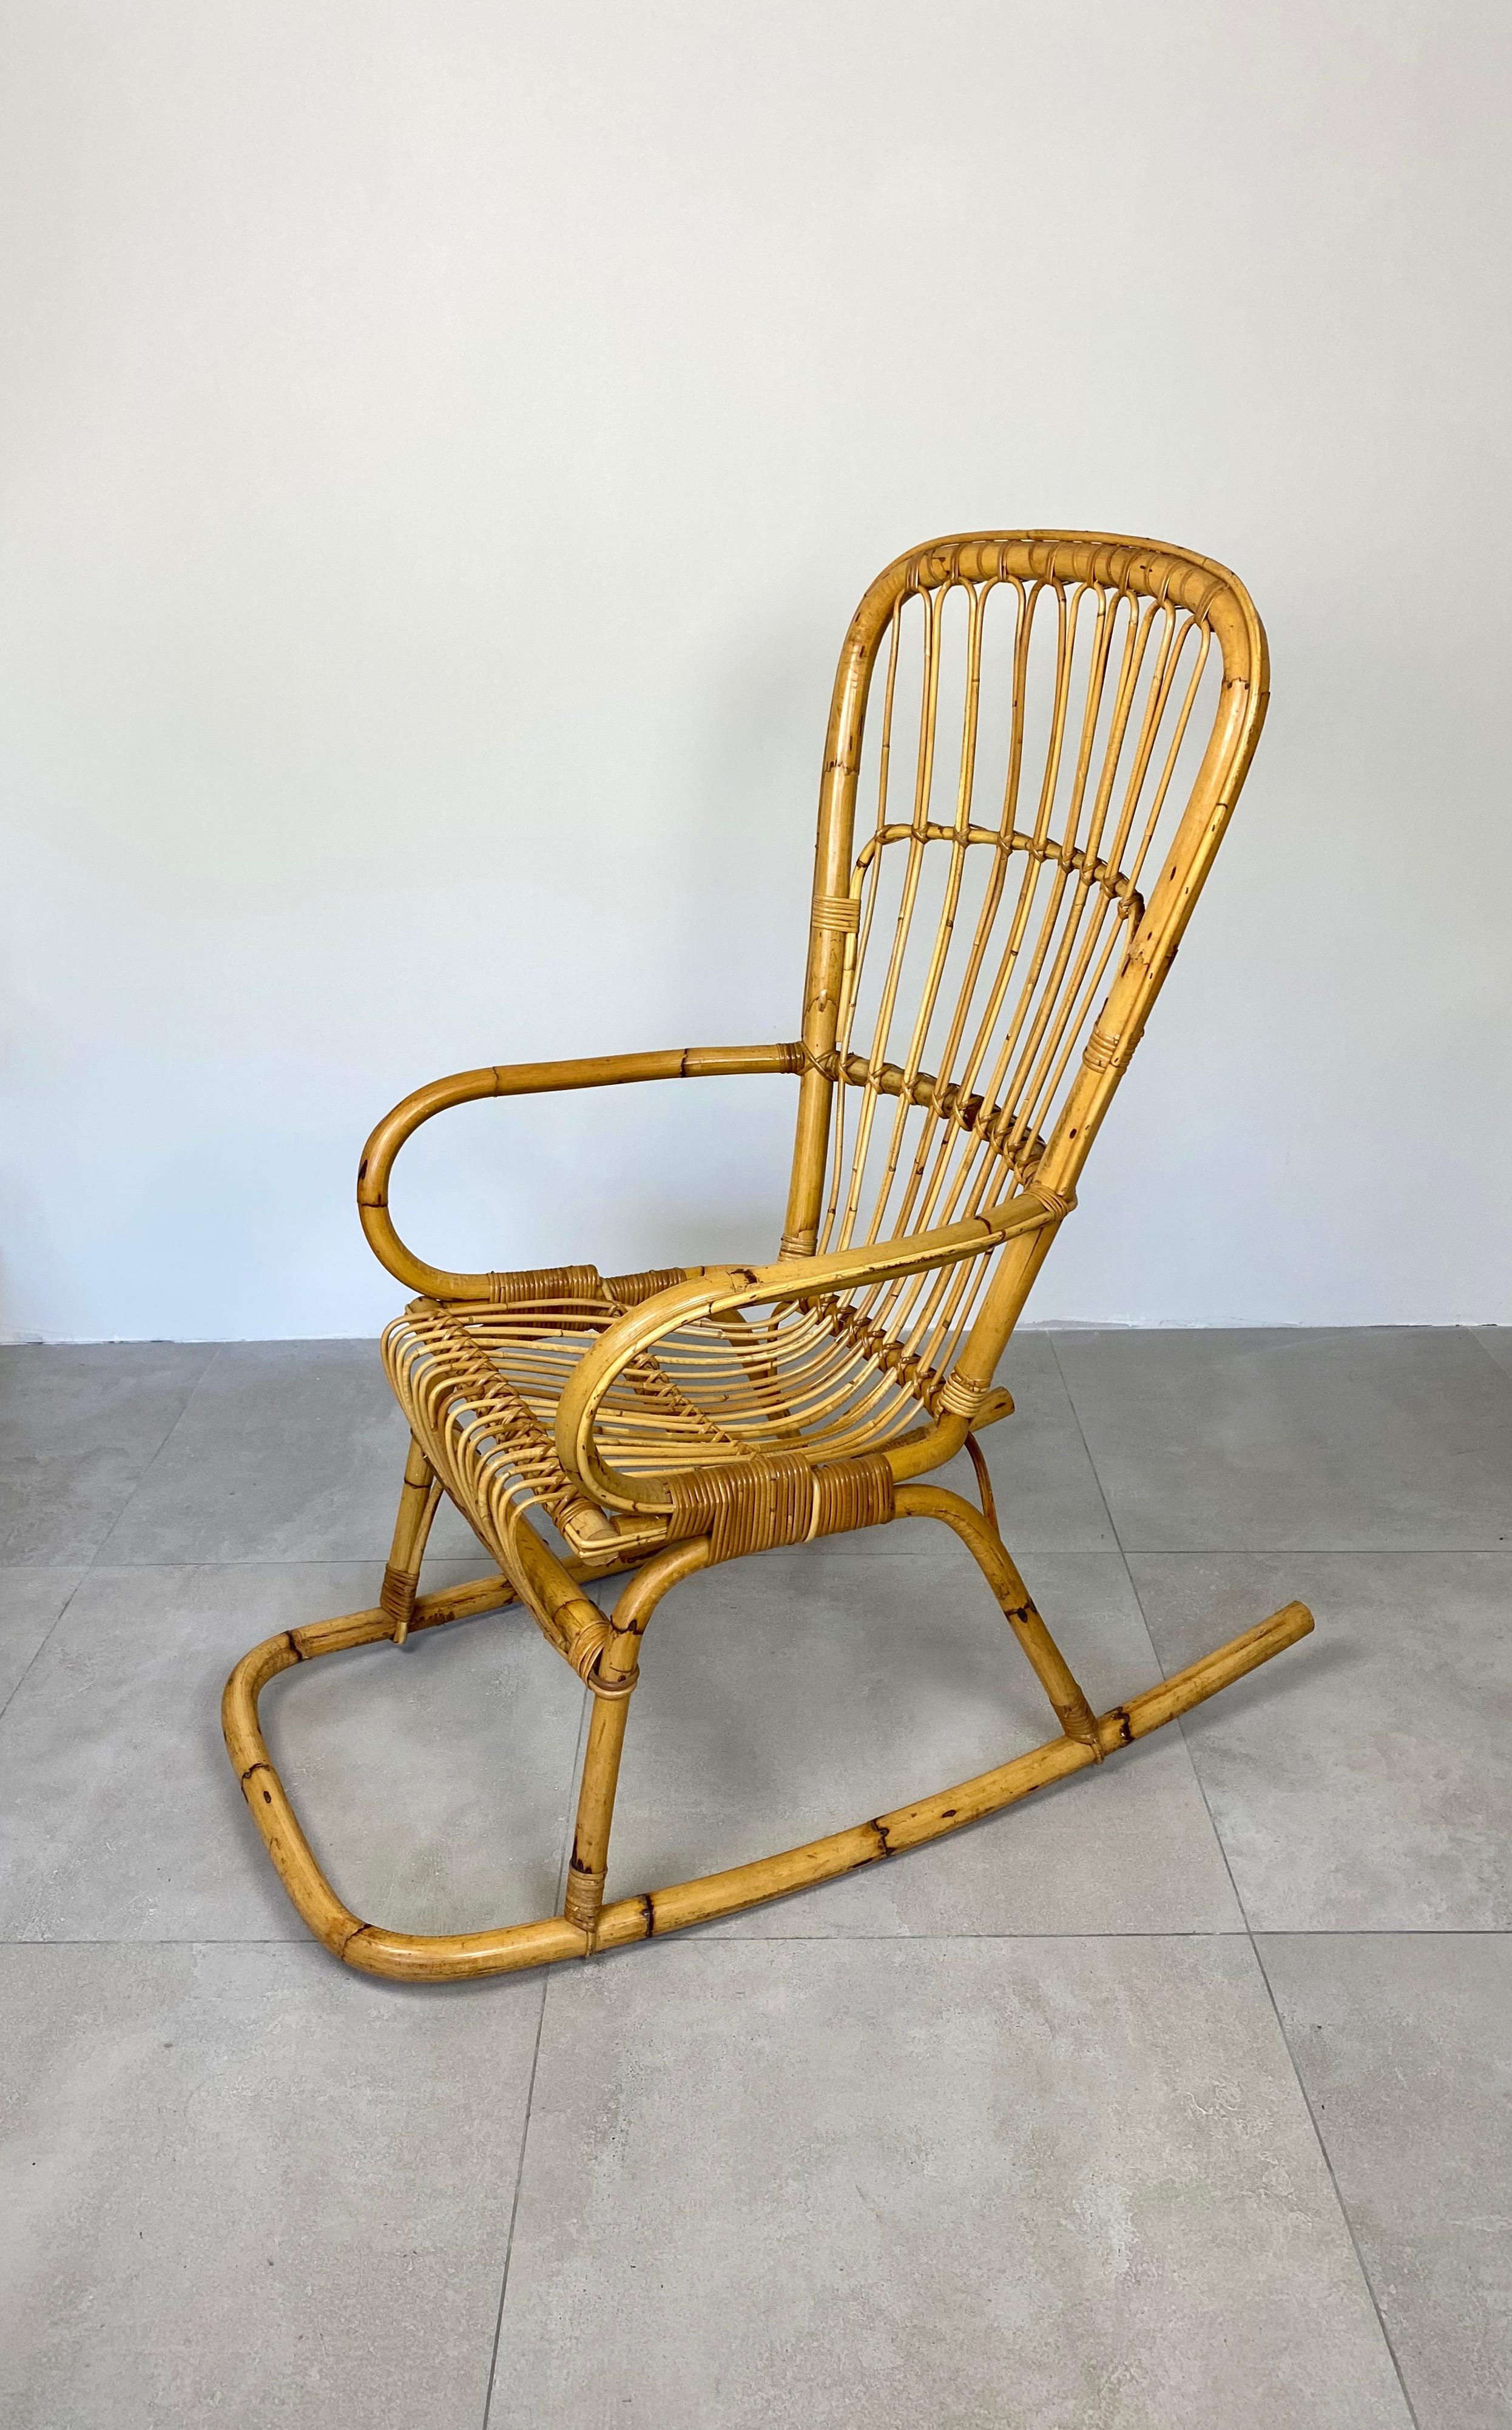 Italian Bamboo Wicker Rocking Chair, Italy, 1960s For Sale